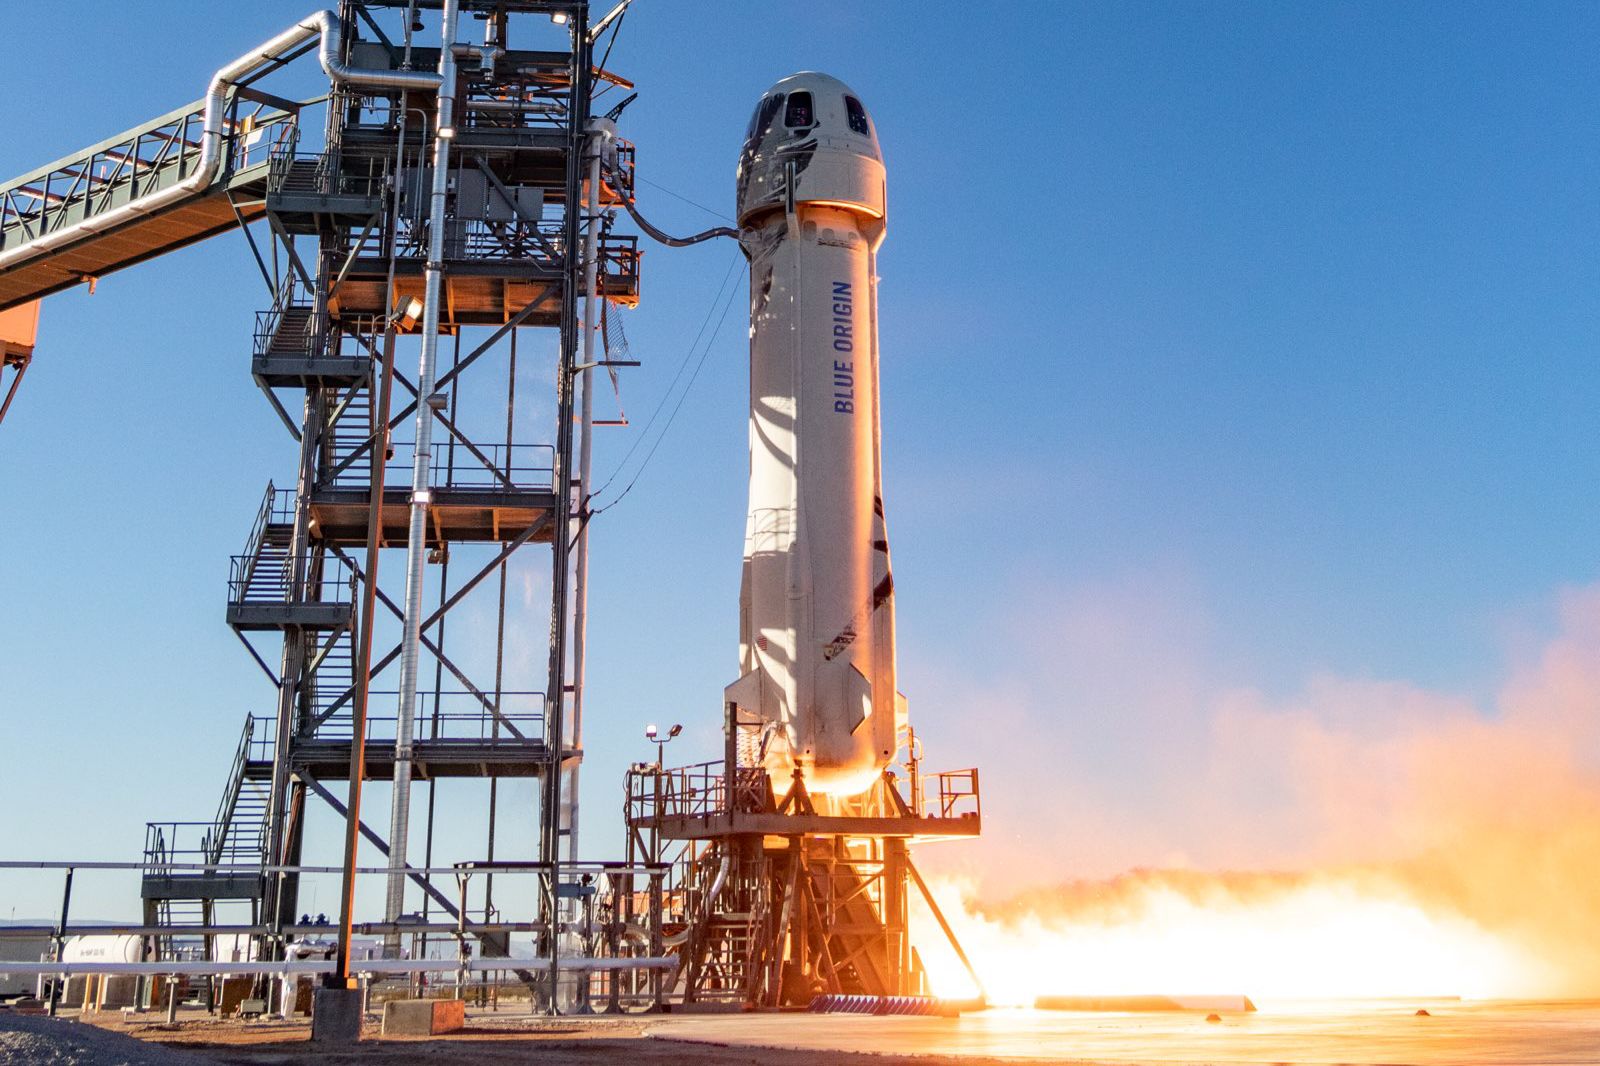 How to watch Jeff Bezos go to space for 11 minutes photo 3